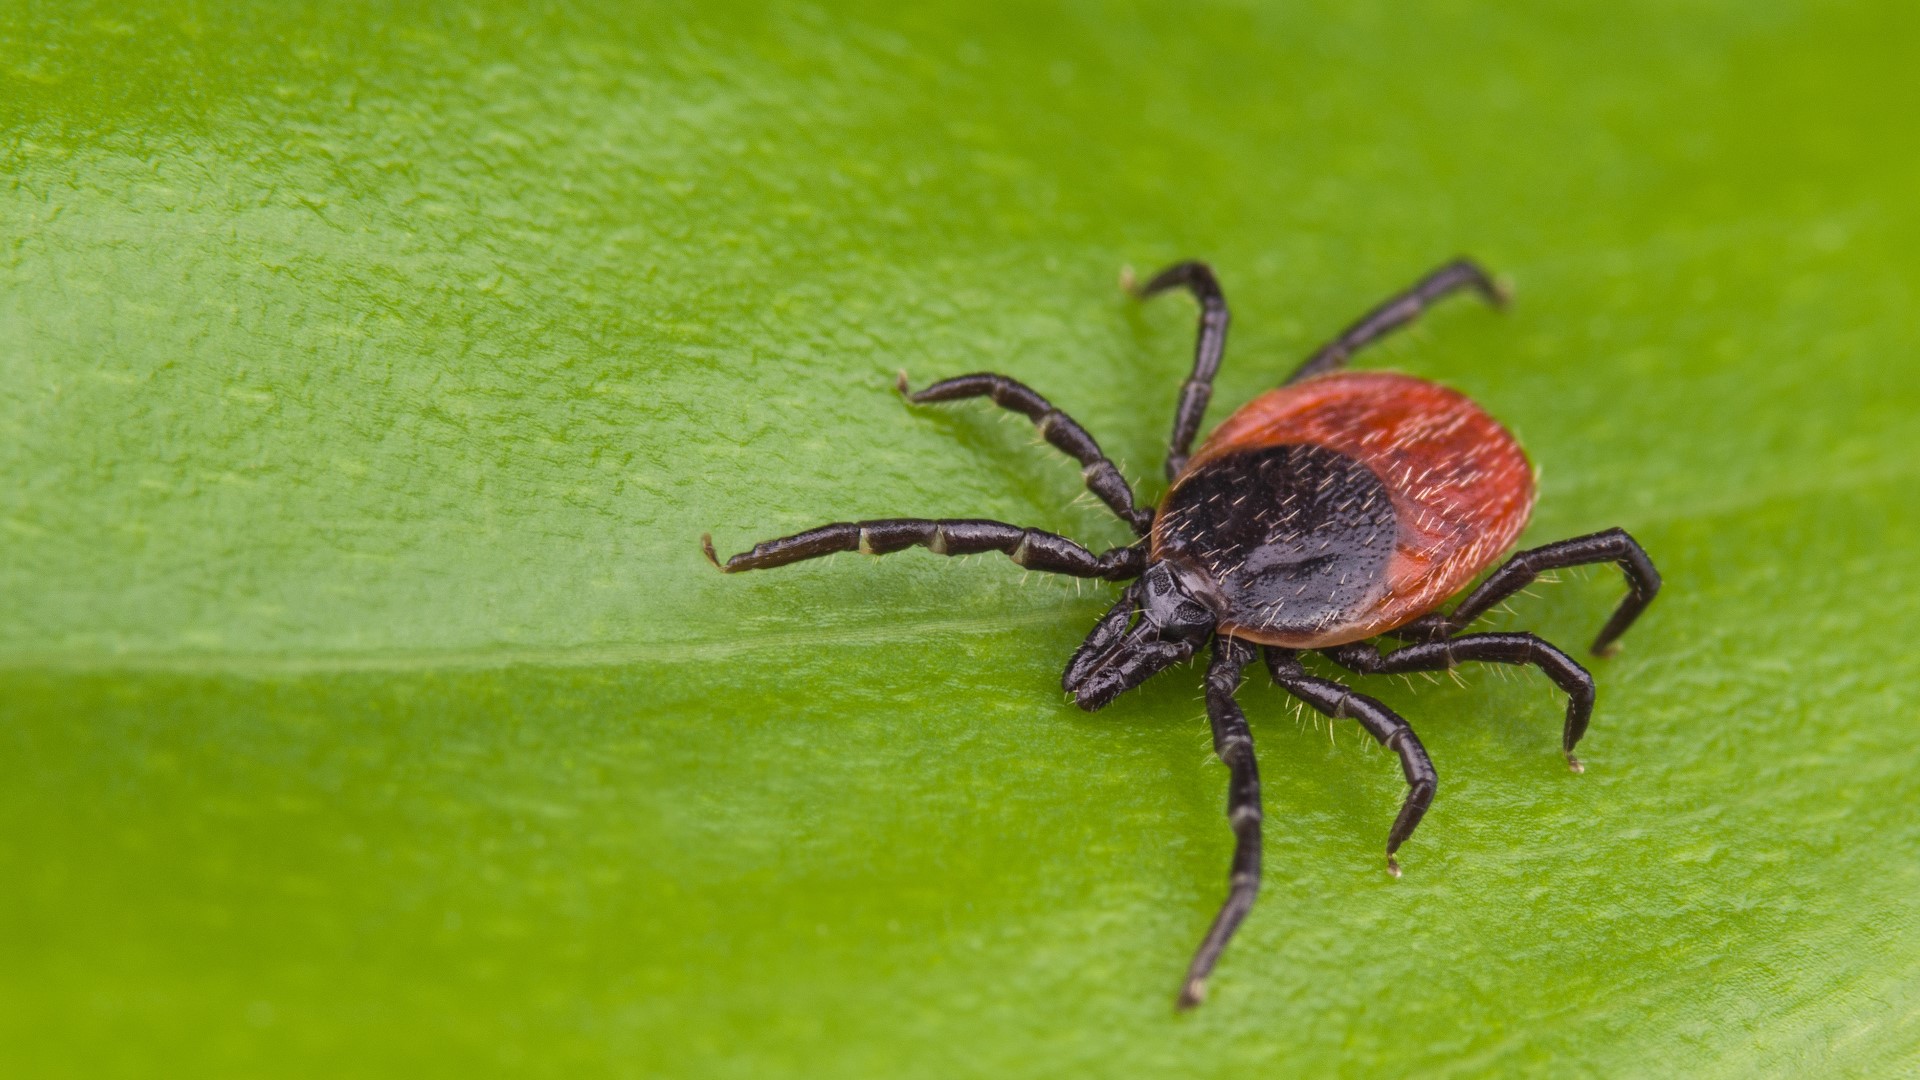 With warmer temperatures on the way, experts say you should be on the lookout for ticks.